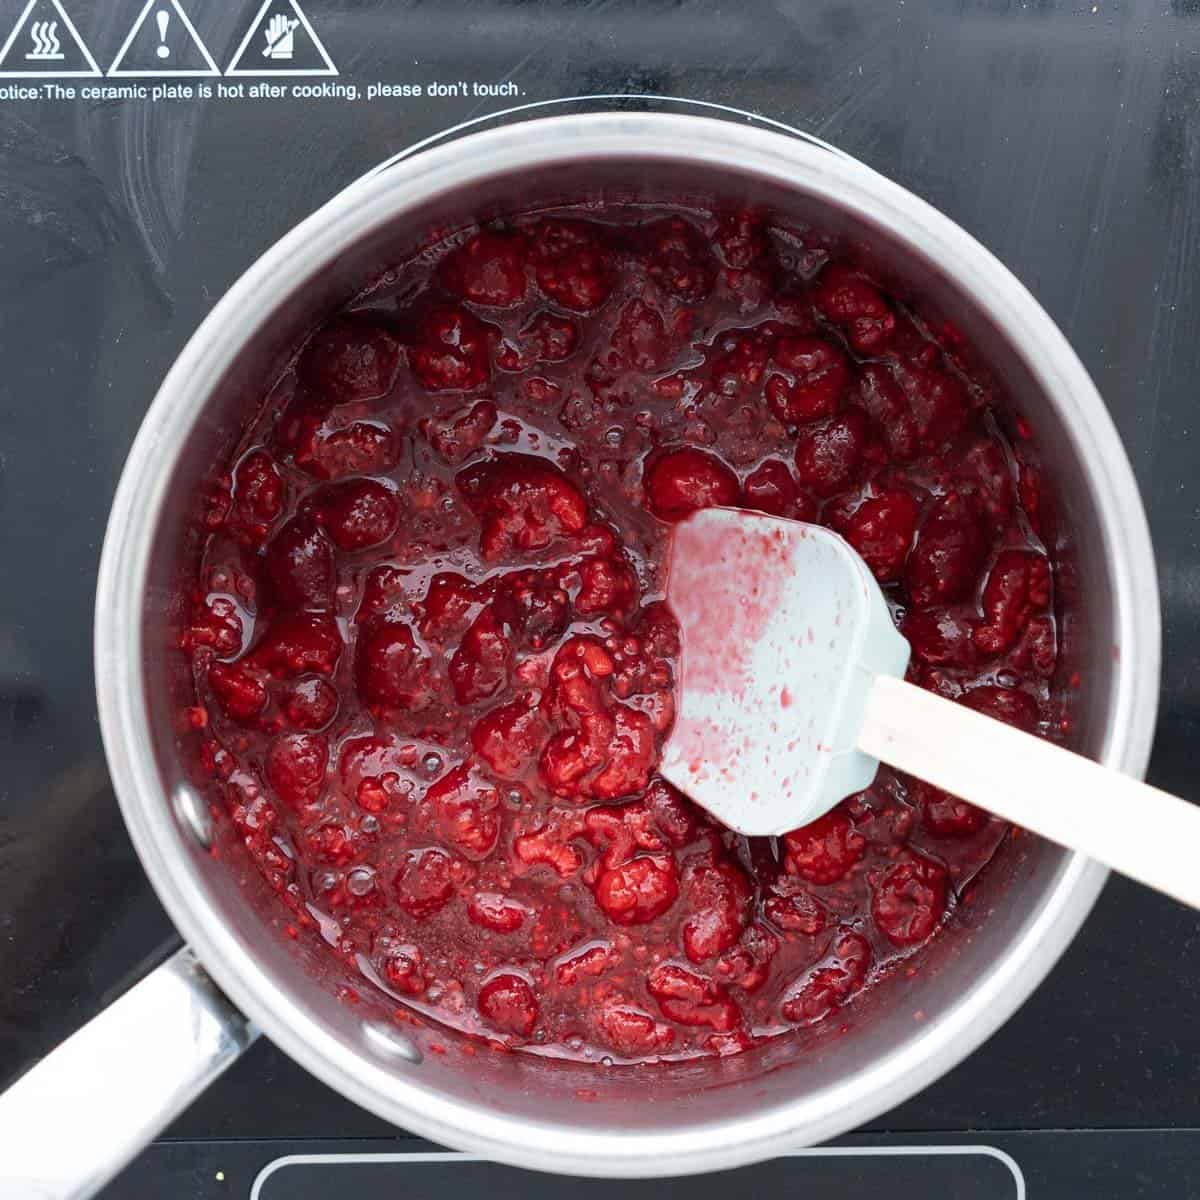 All the ingredients to make the raspberry puree in a saucepan on the element simmering with a spatula resting on the side